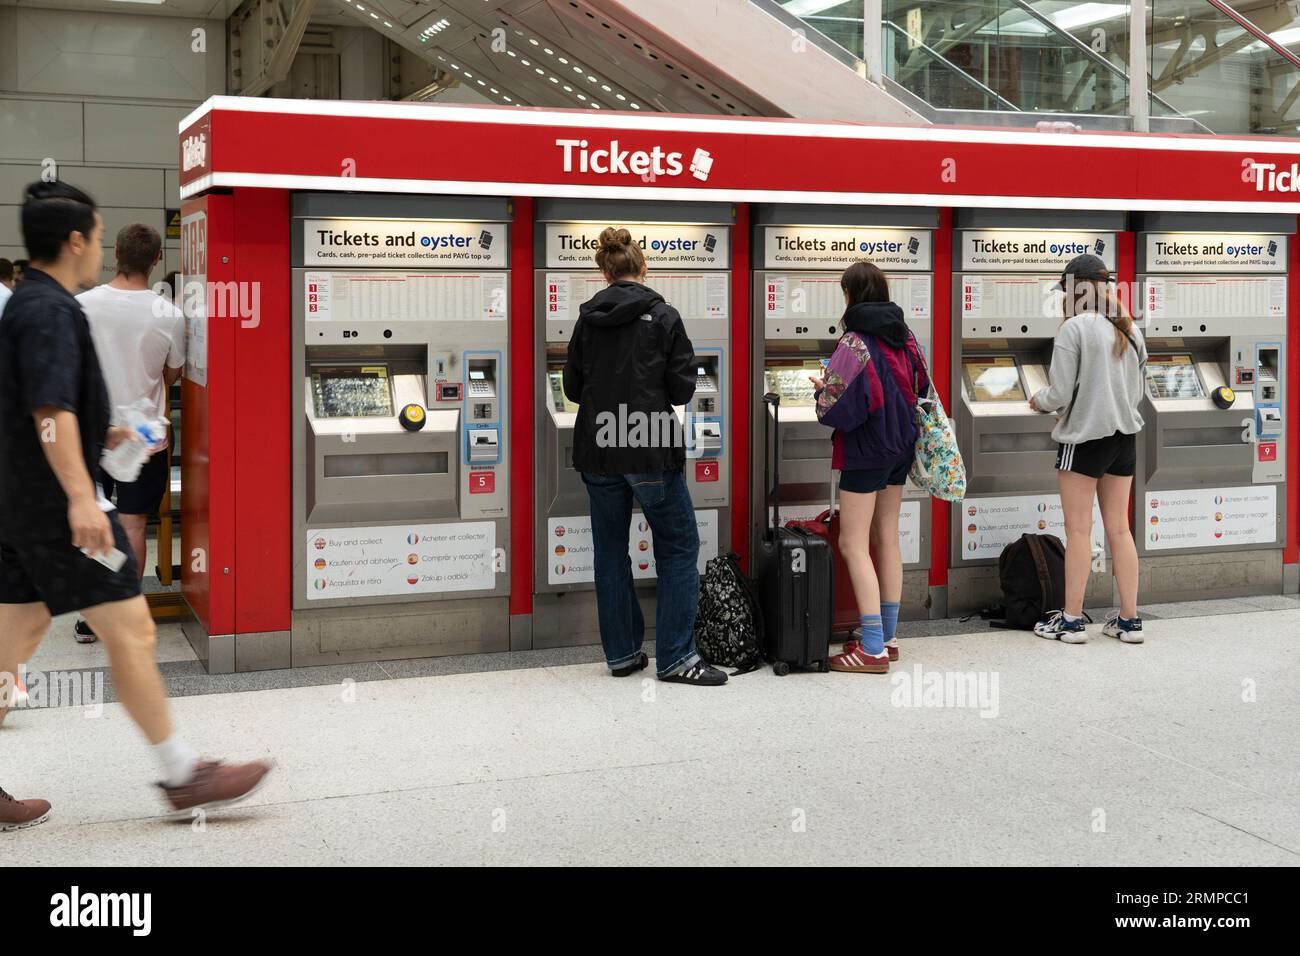 Train passengers purchasing tickets from a ticket machine at Liverpool Street Station, London. Theme: ticket prices, price inflation, cost of living Stock Photo